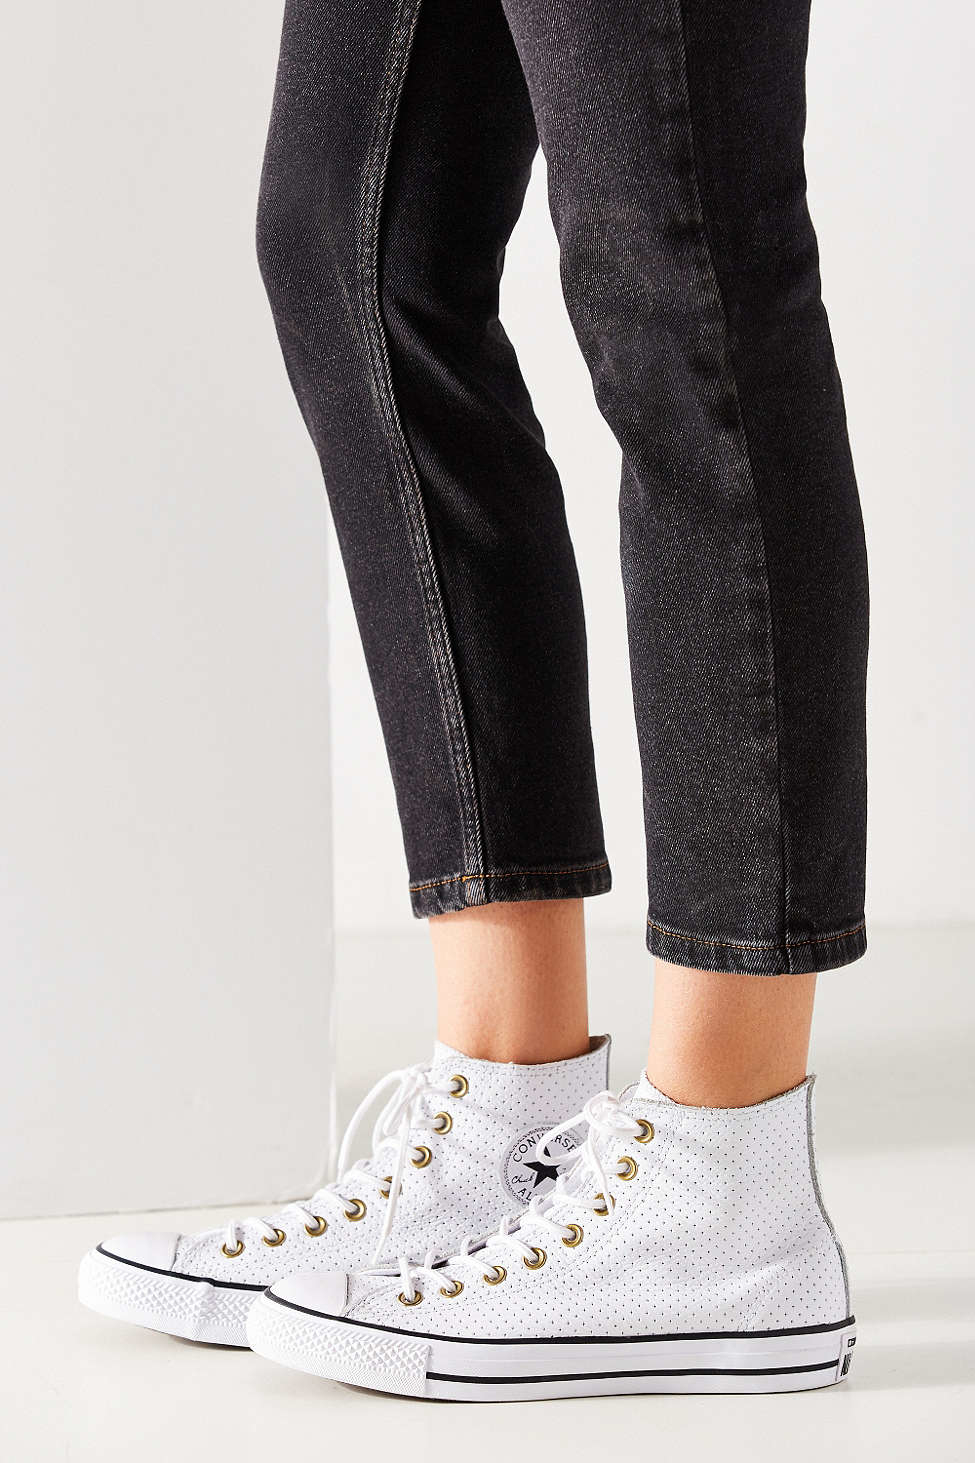 Converse Chuck Taylor Perforated Leather Sneaker in White - Lyst